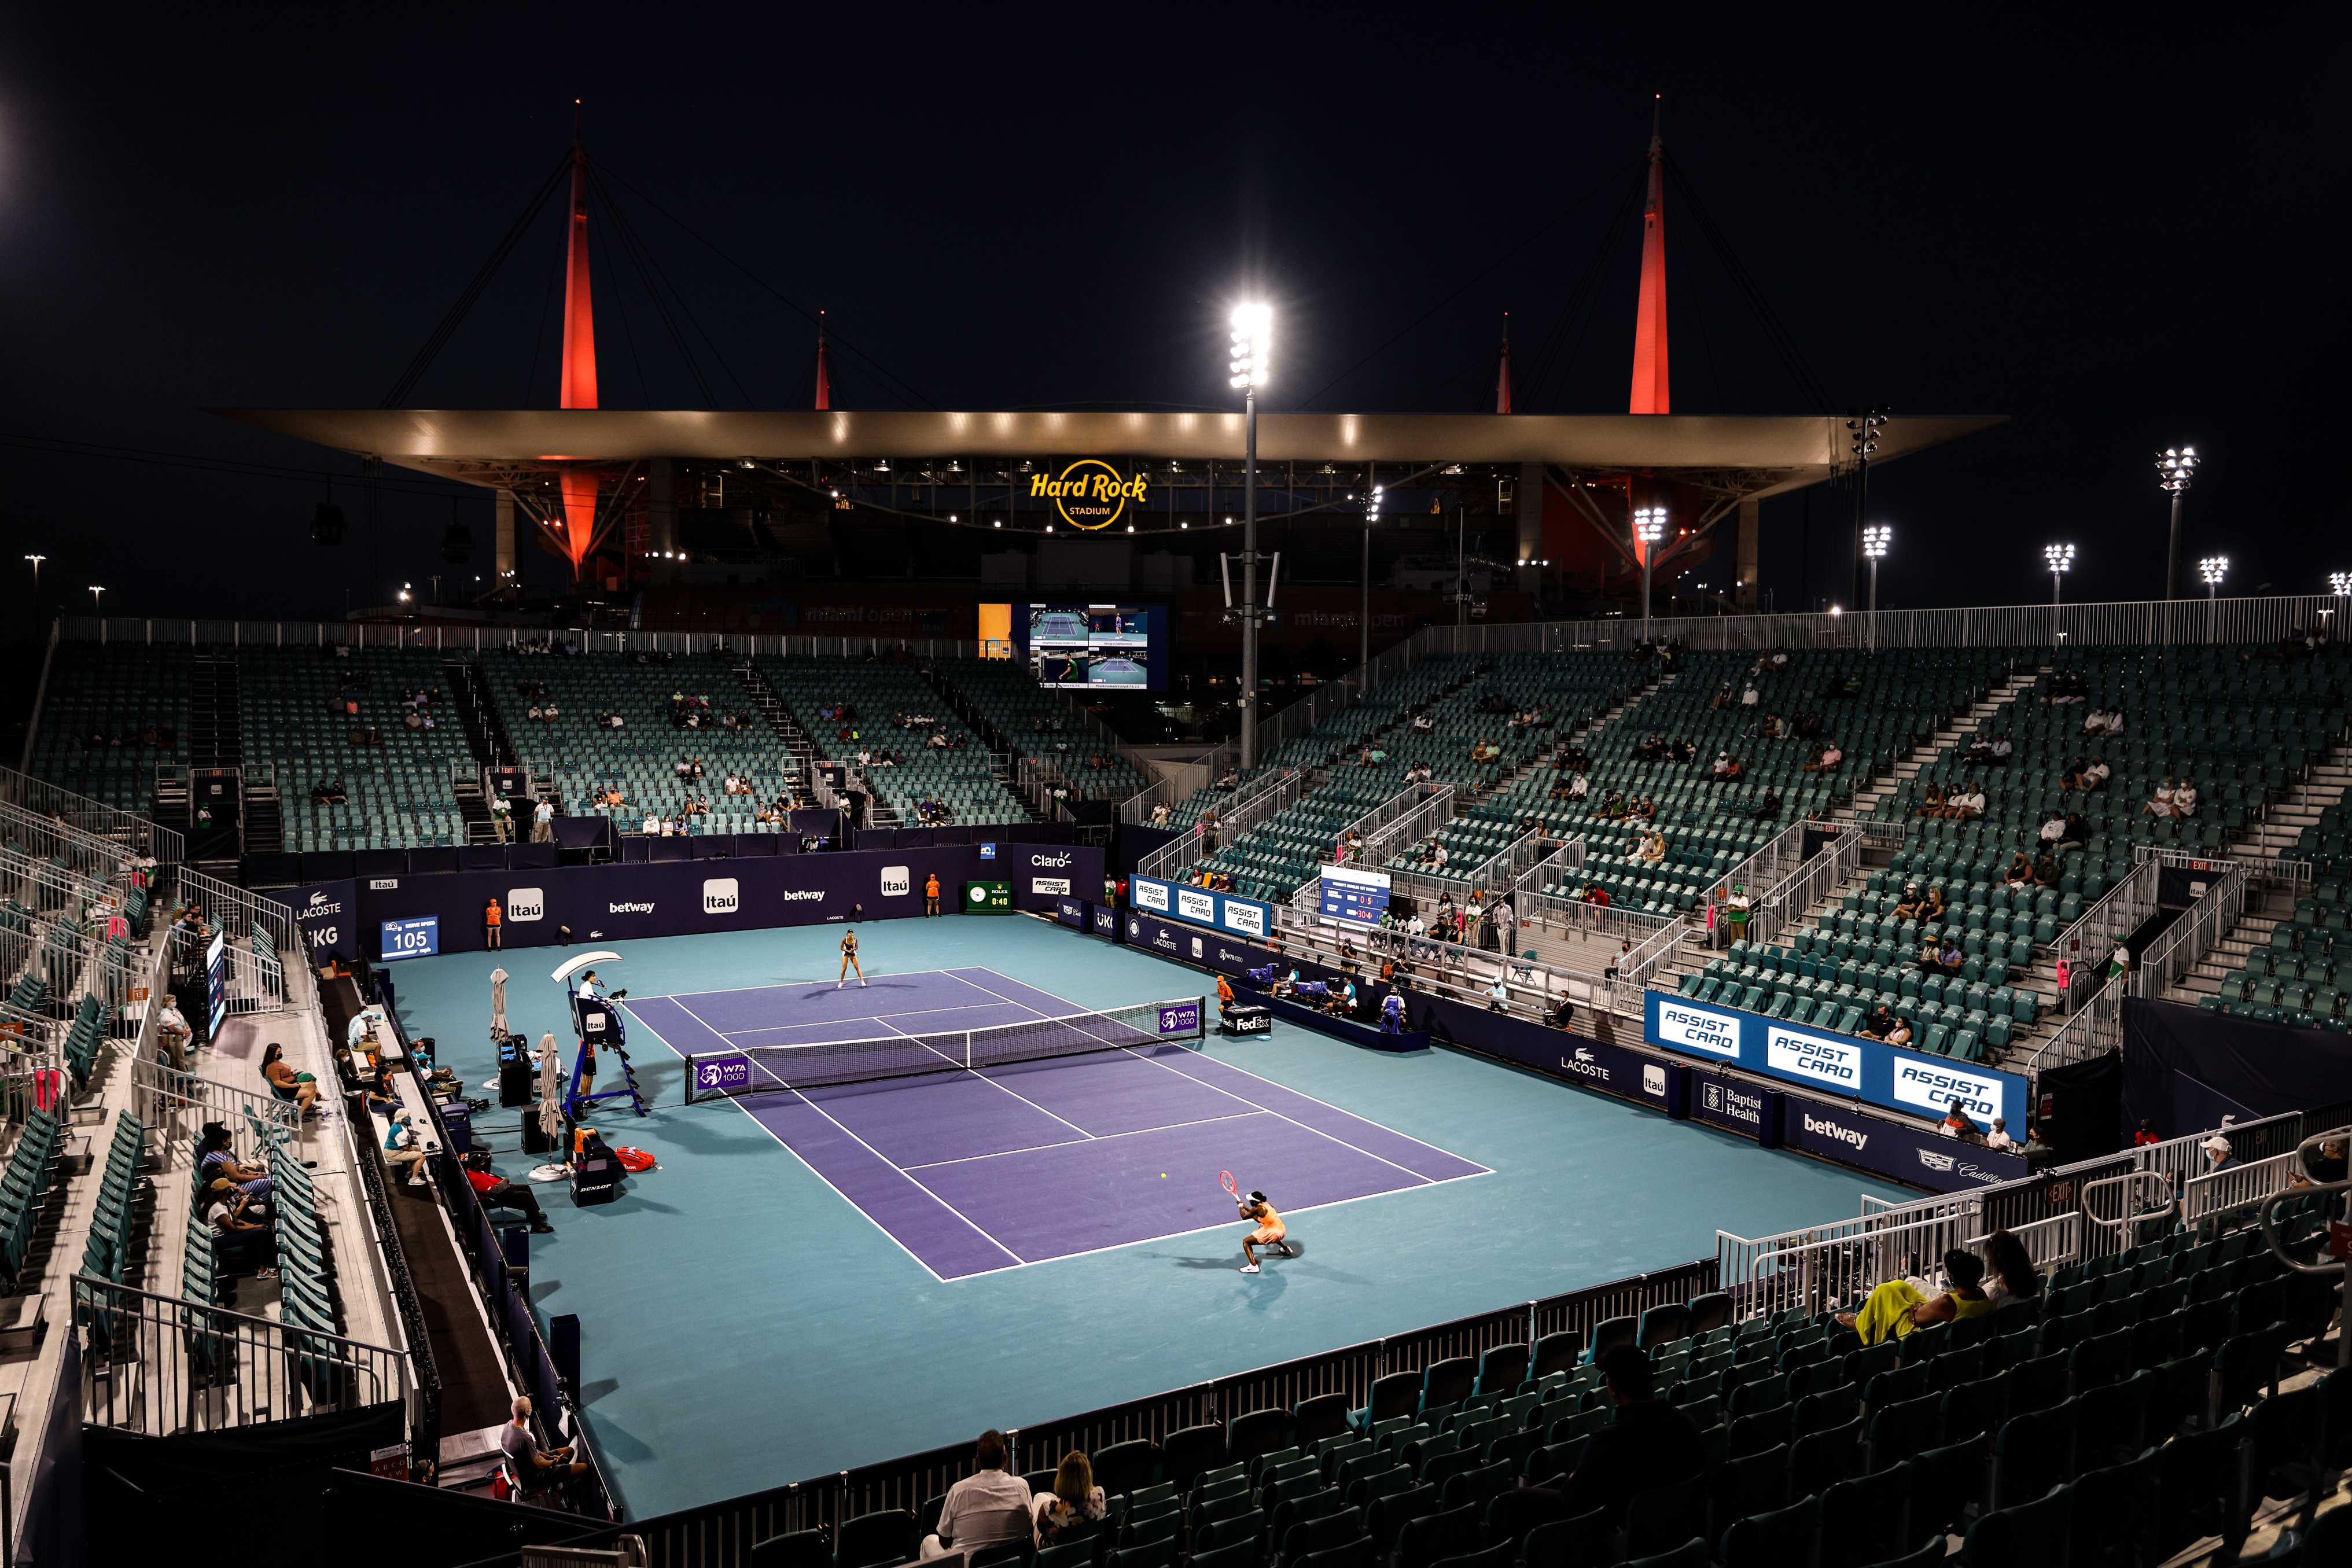 Miami Open Presented By Itau 2022: How to watch, TV times, live stream, schedule, and location